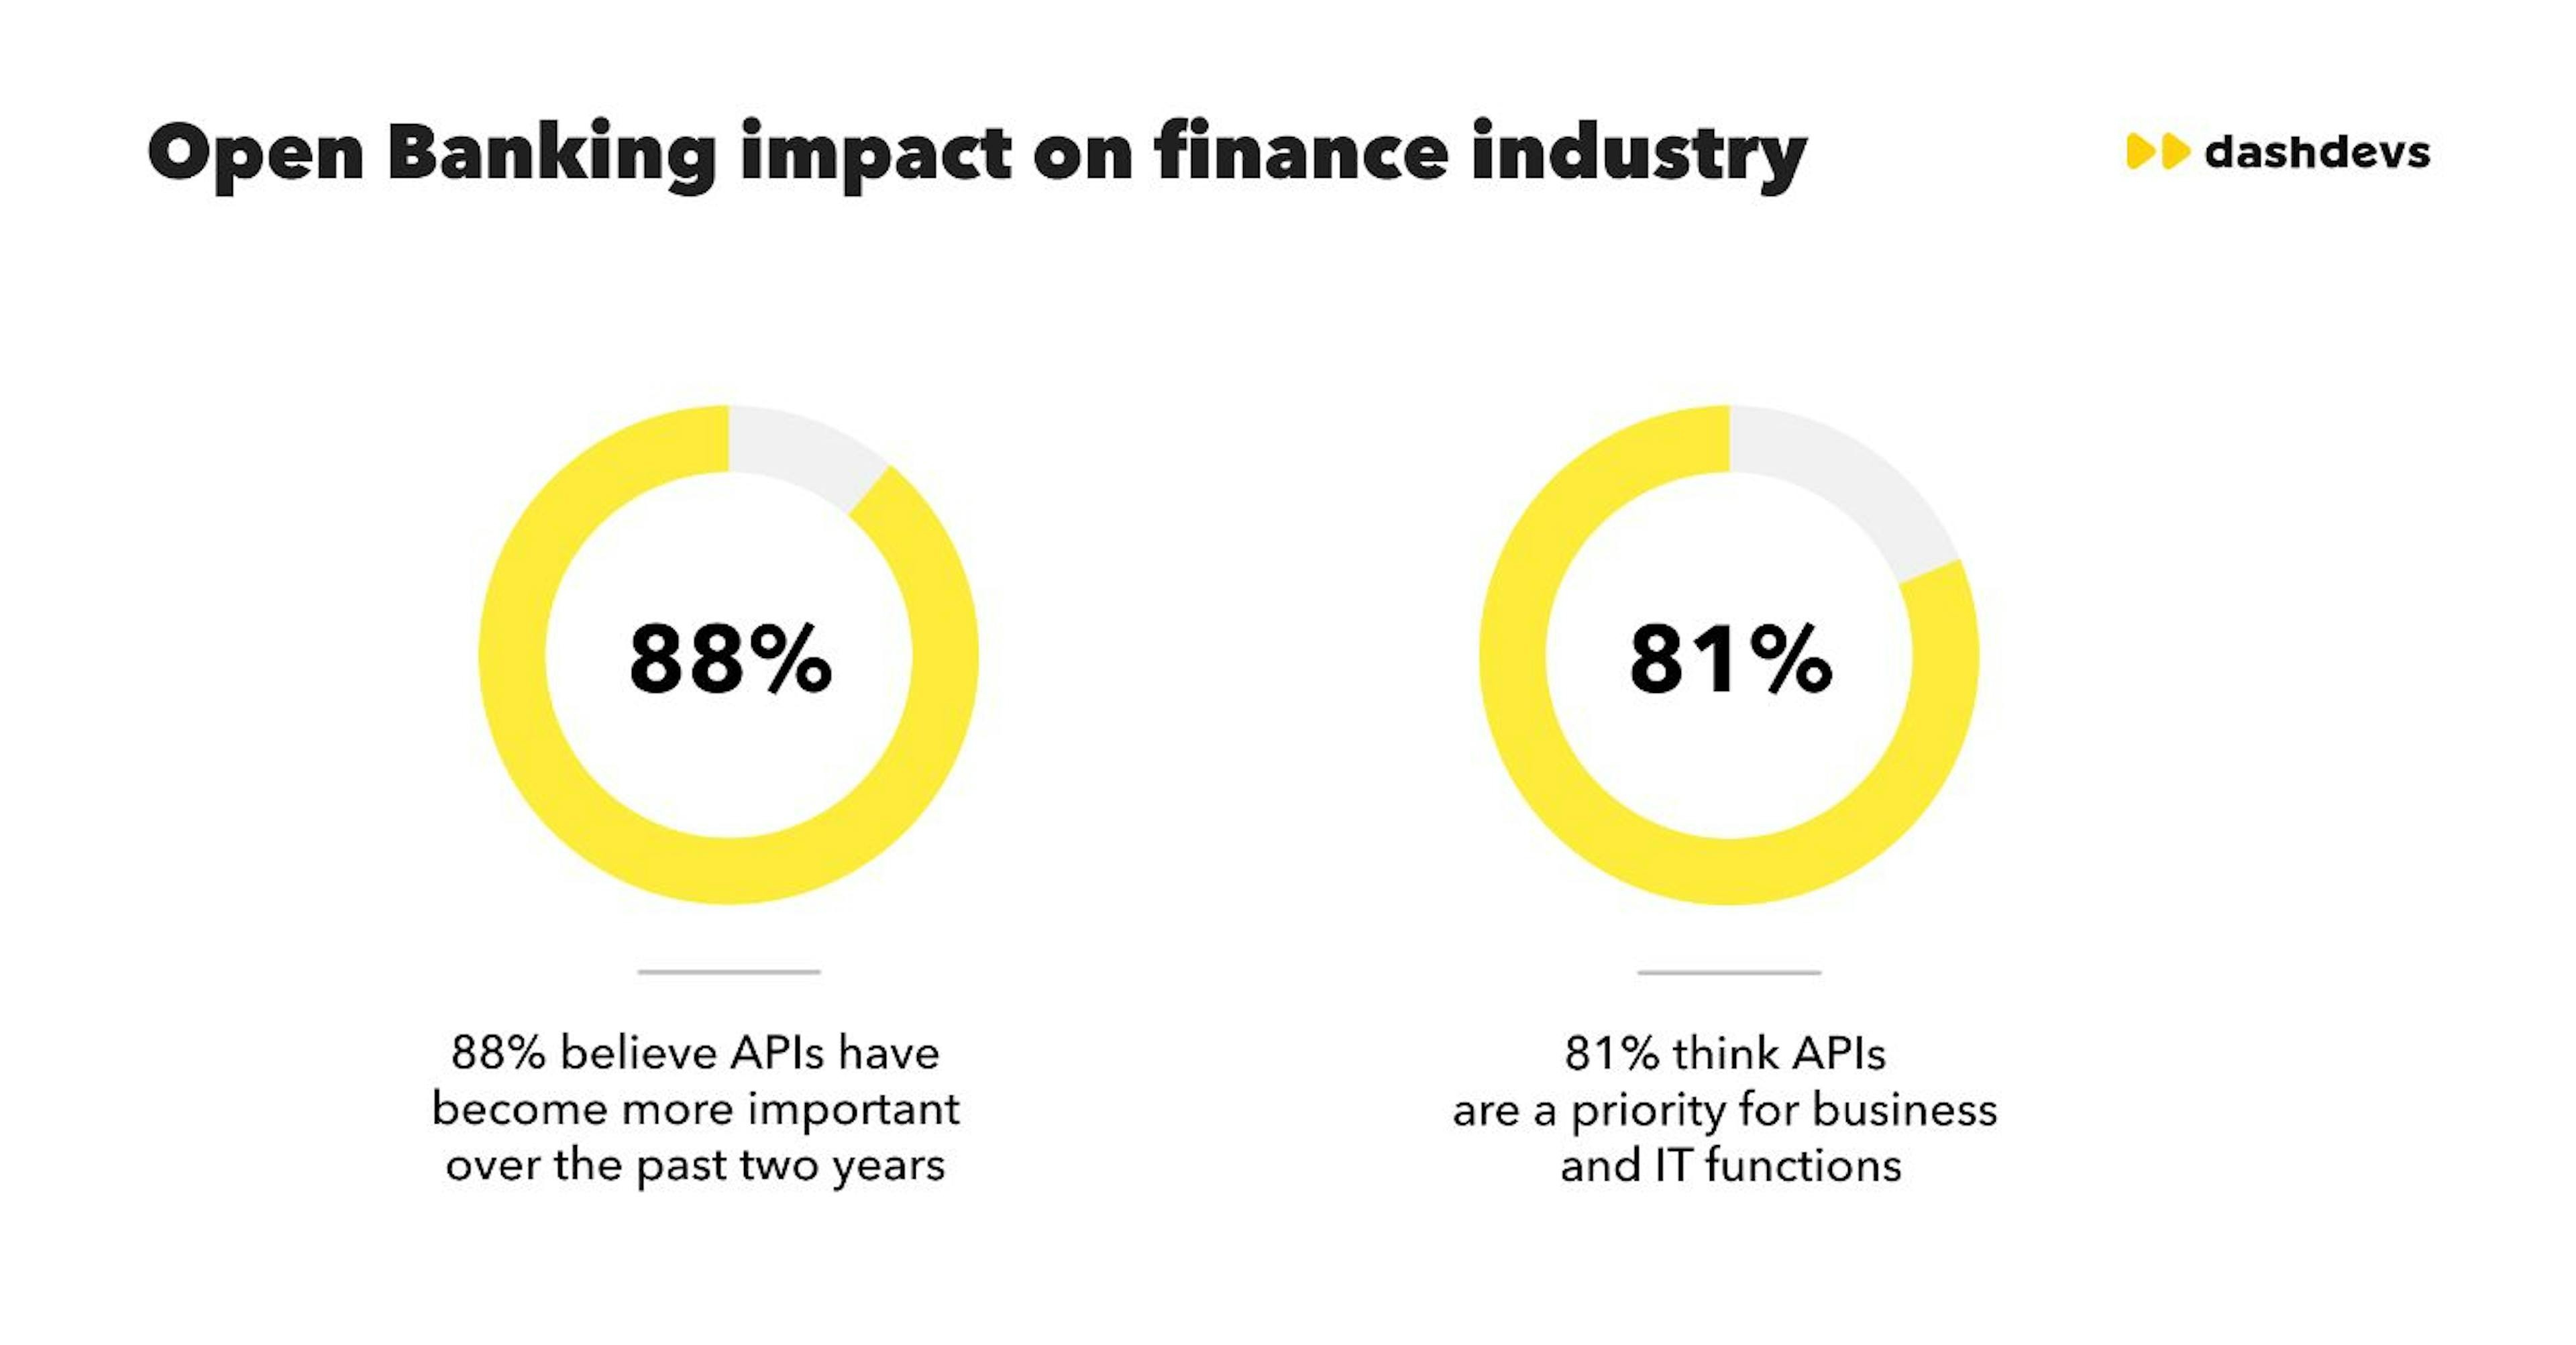 Open Banking impact on the finance industry